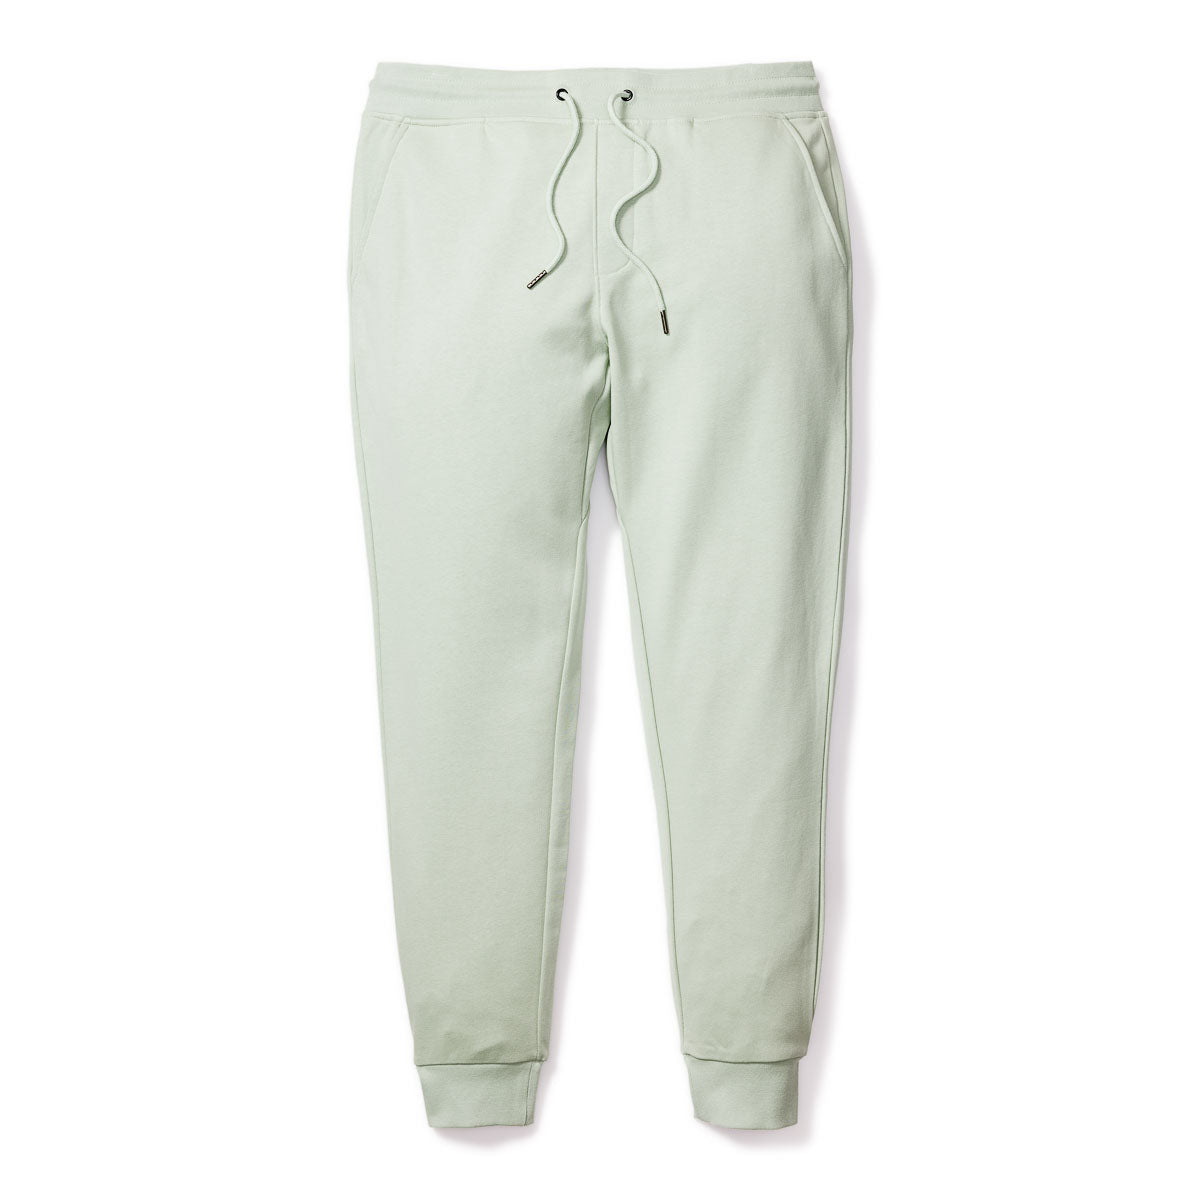 3:16 Core - French Terry Jogger - Seafoam